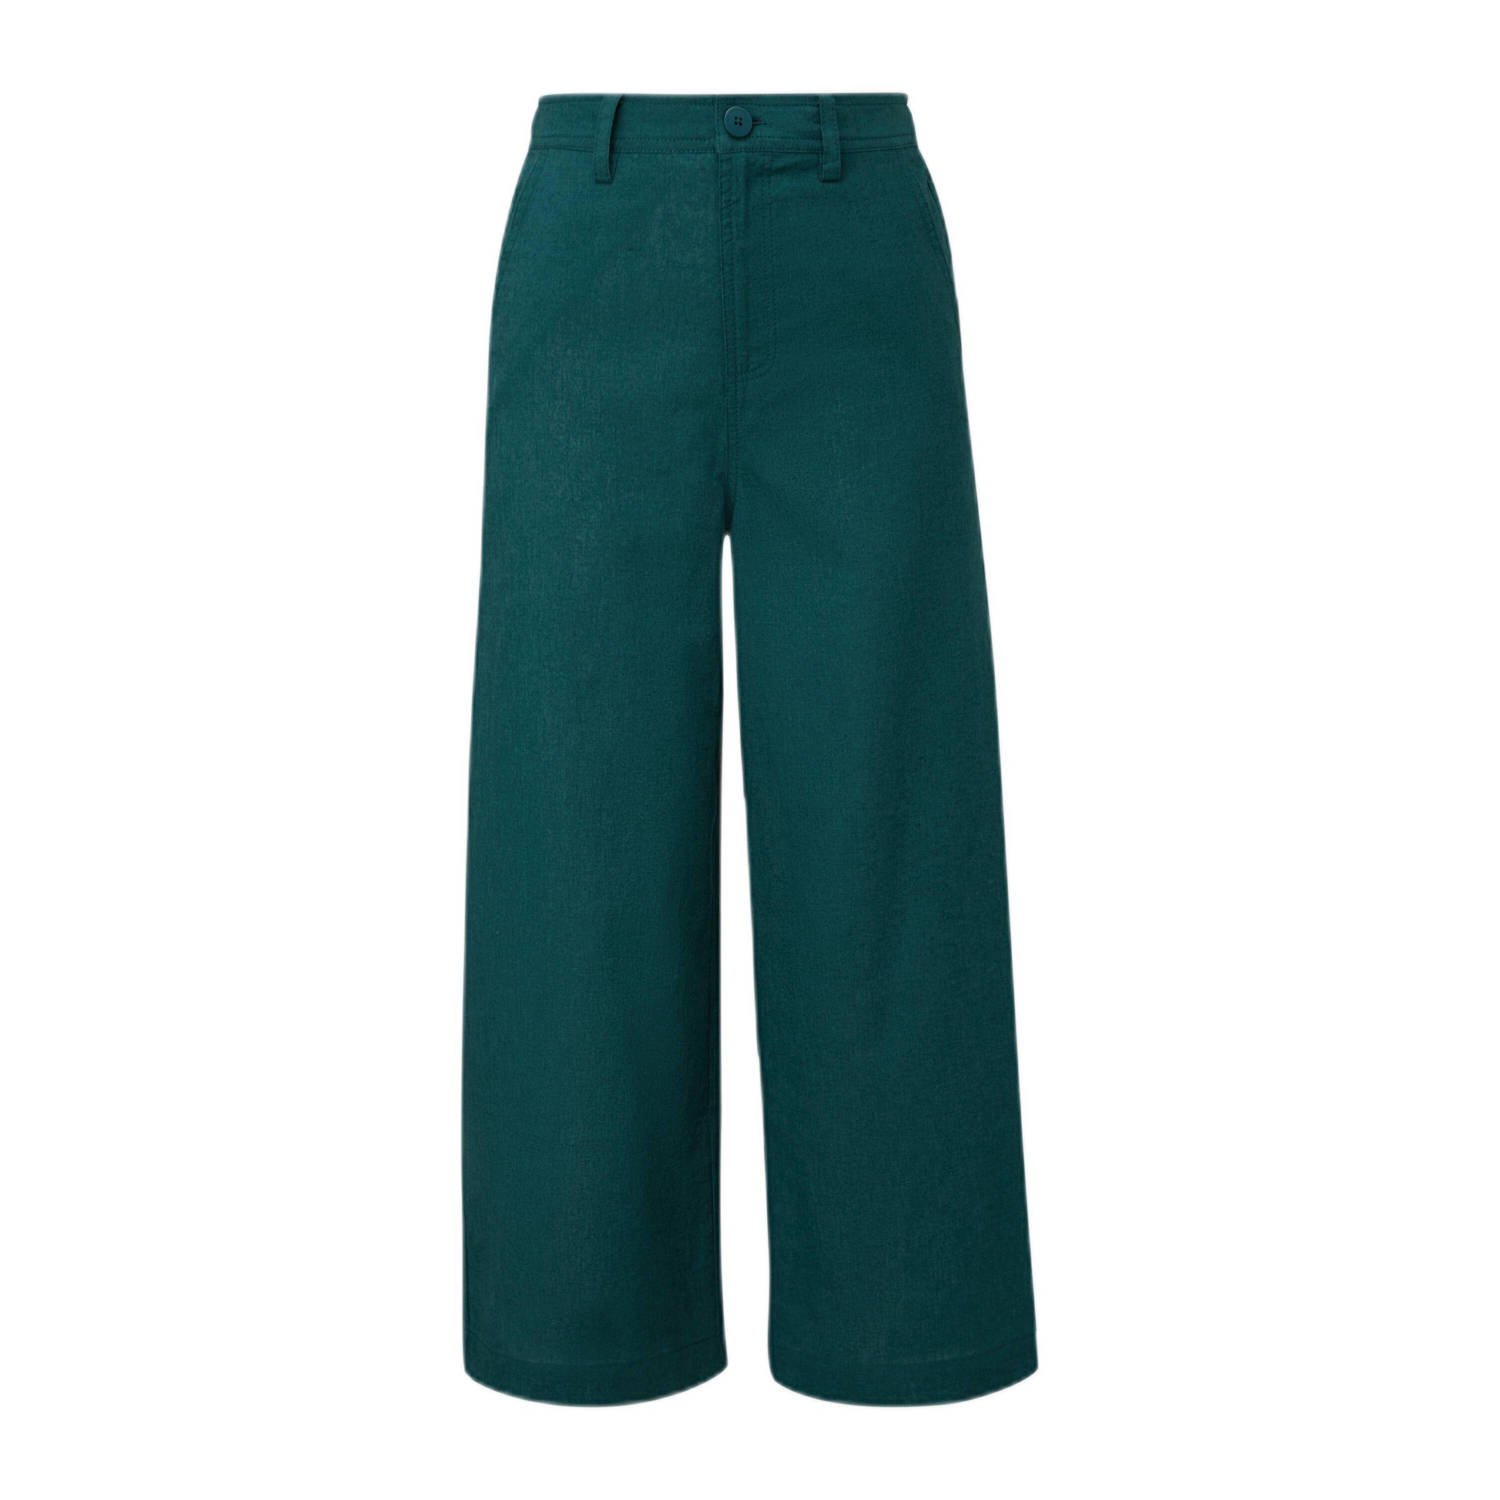 Q S by s.Oliver wide leg broek petrol